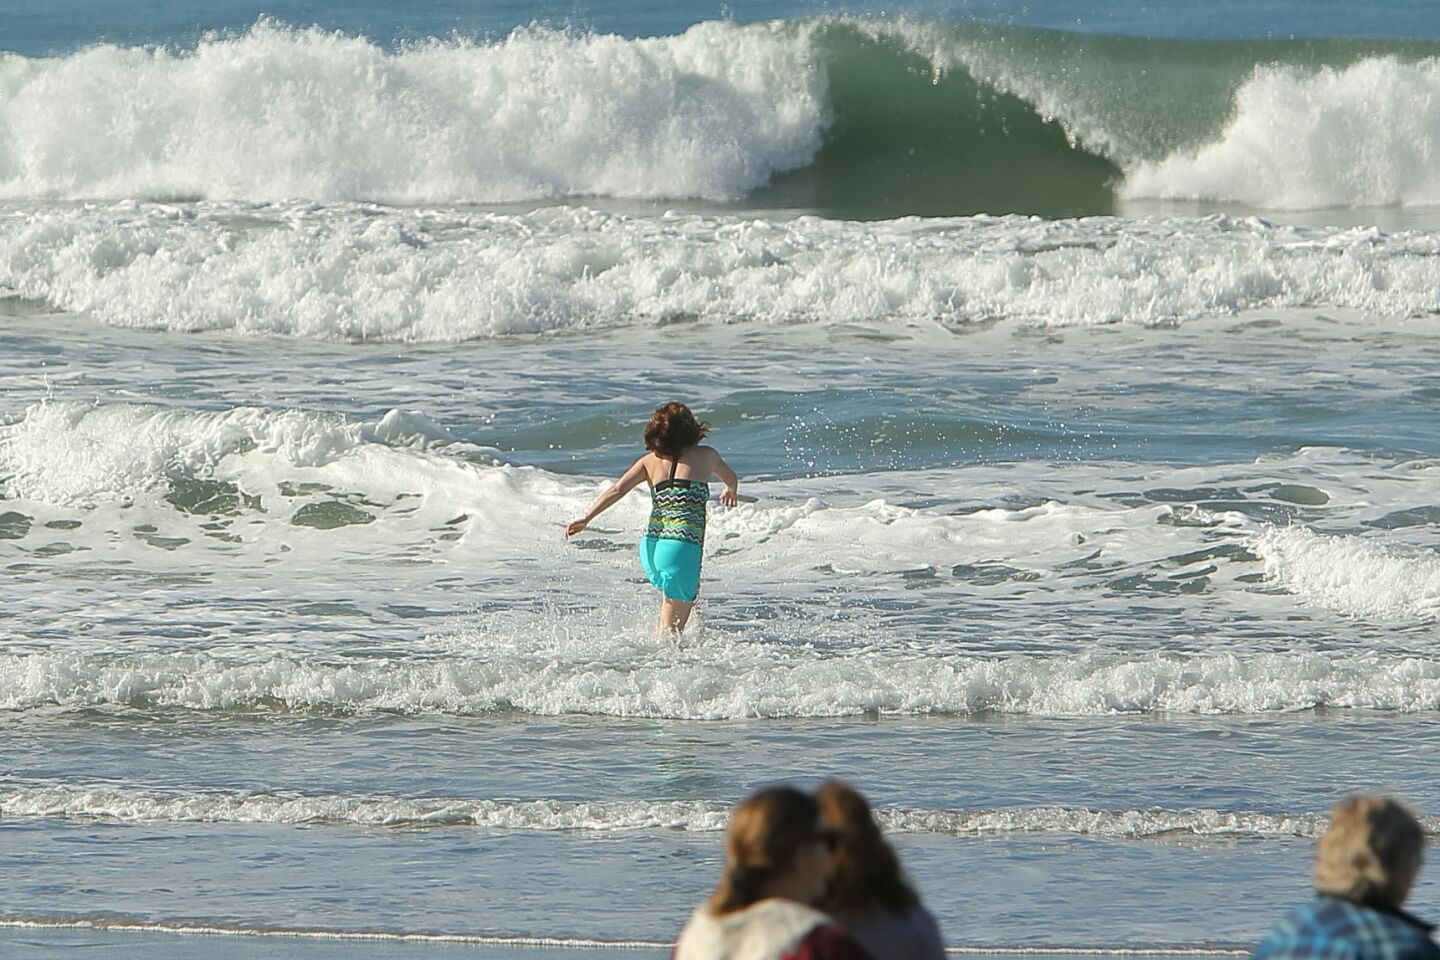 A member of the San Dieguito Boogie Babes plunged into the ocean on New Years Day 2022 at Fletcher Cove in Solana Beach